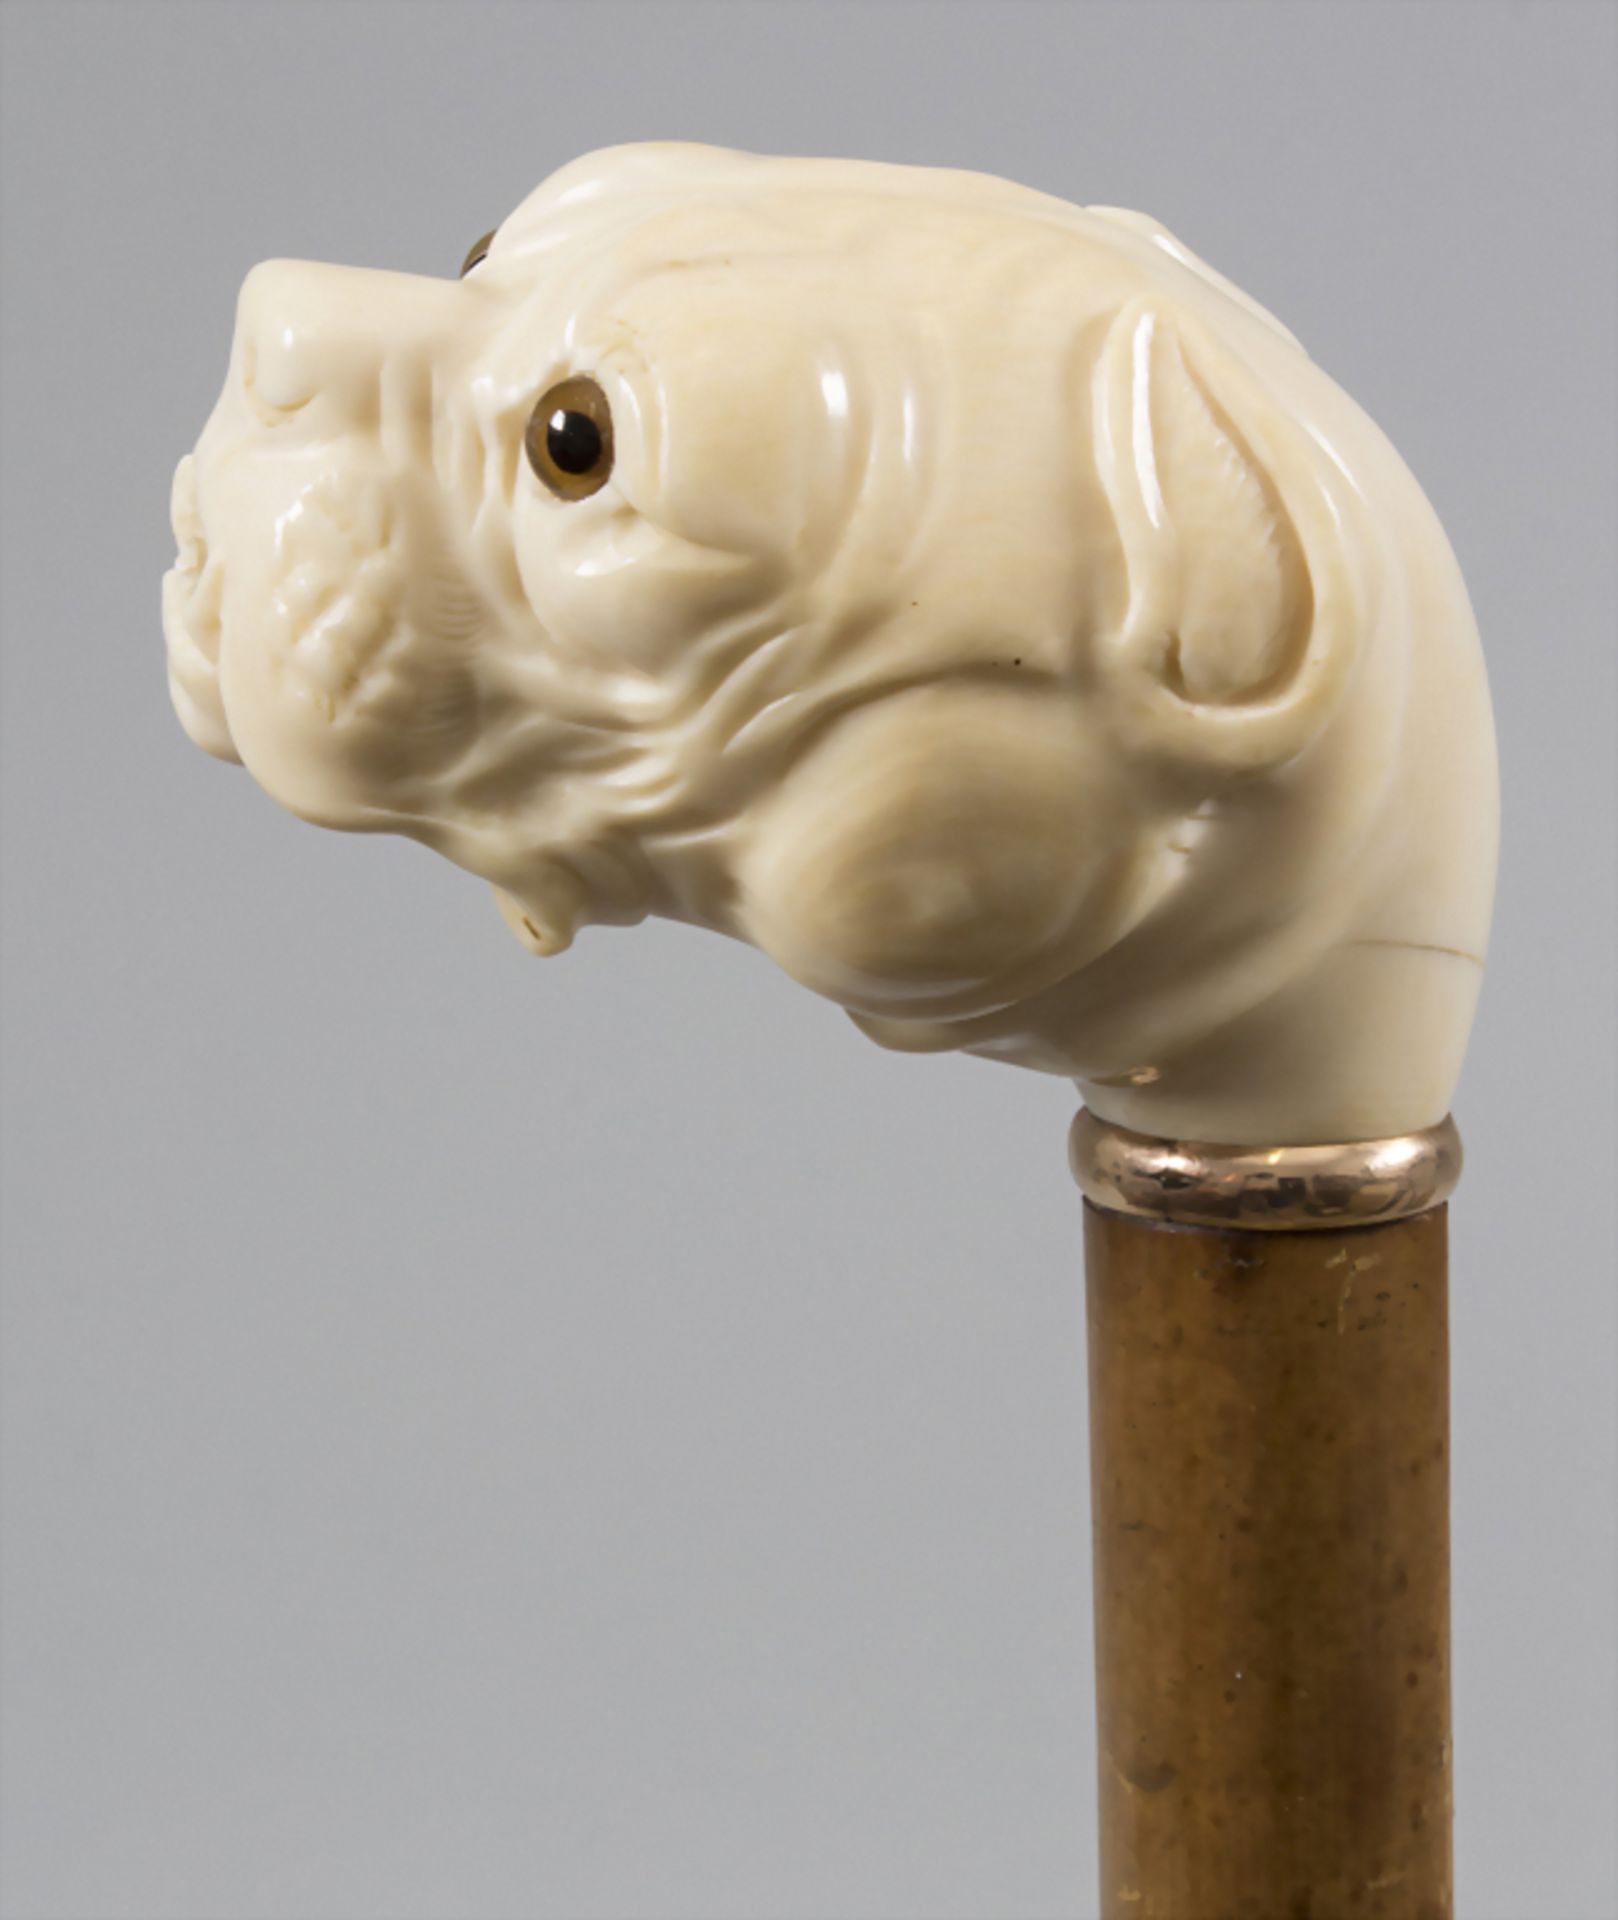 Spazierstock mit Bulldoggenkopf-Griff / A walking stick / cane with a bulldog's head shaped hilt - Image 2 of 5